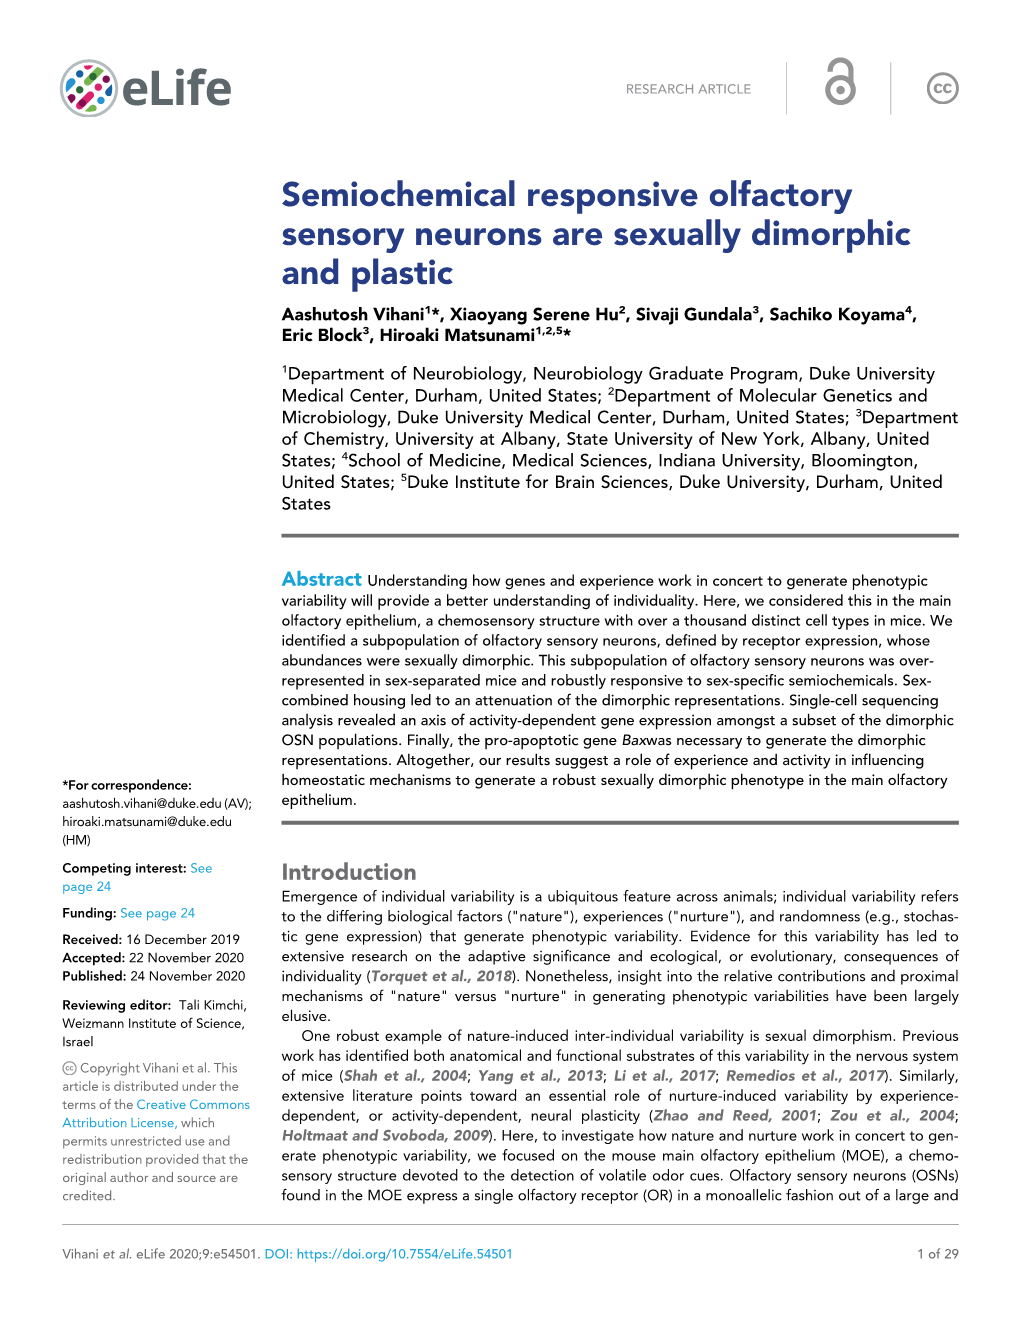 Semiochemical Responsive Olfactory Sensory Neurons Are Sexually